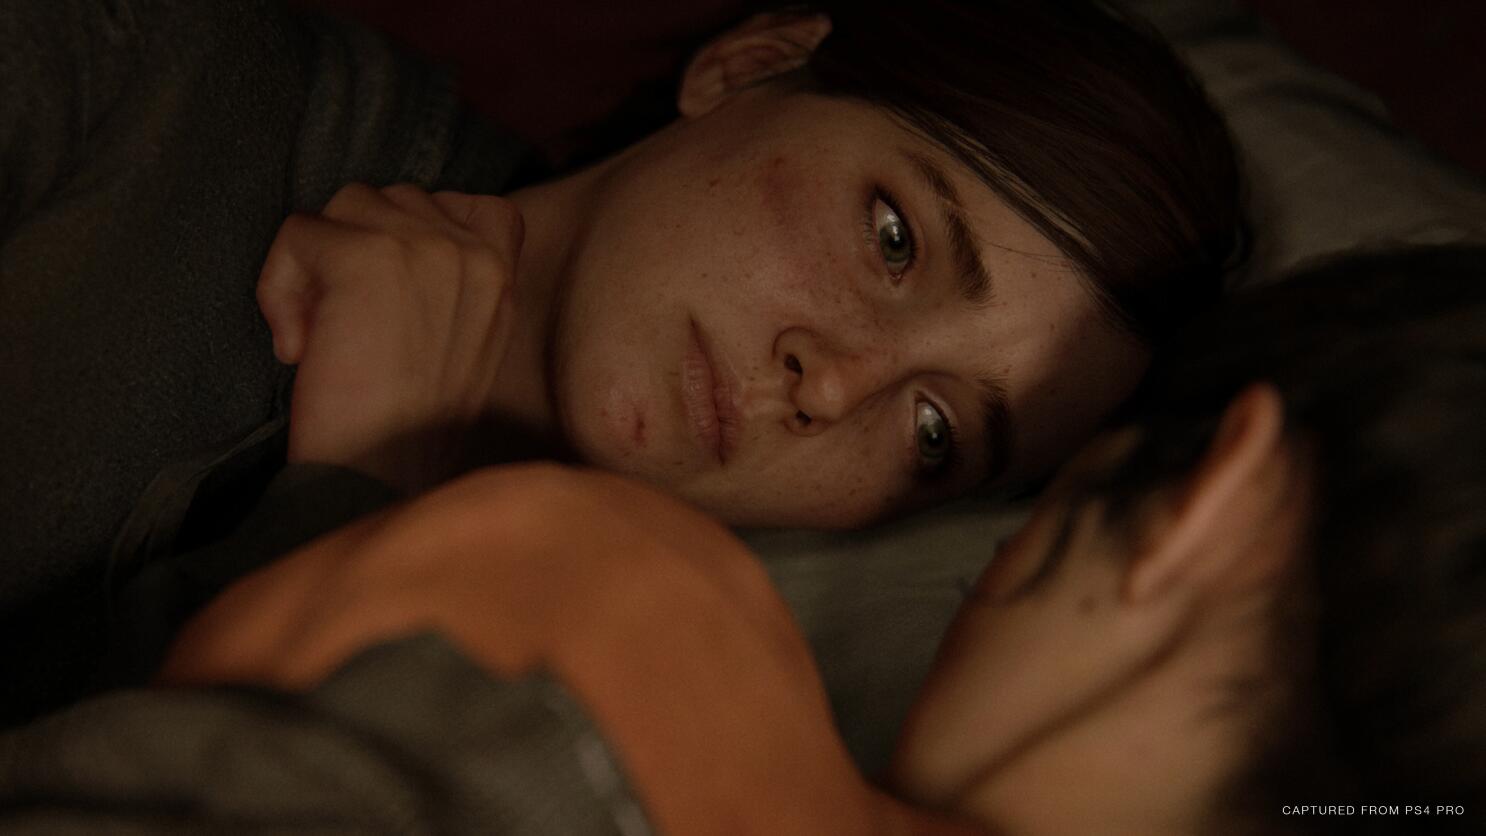 The Last Of Us Show Fans Are Freaking Out About Dina Right Now